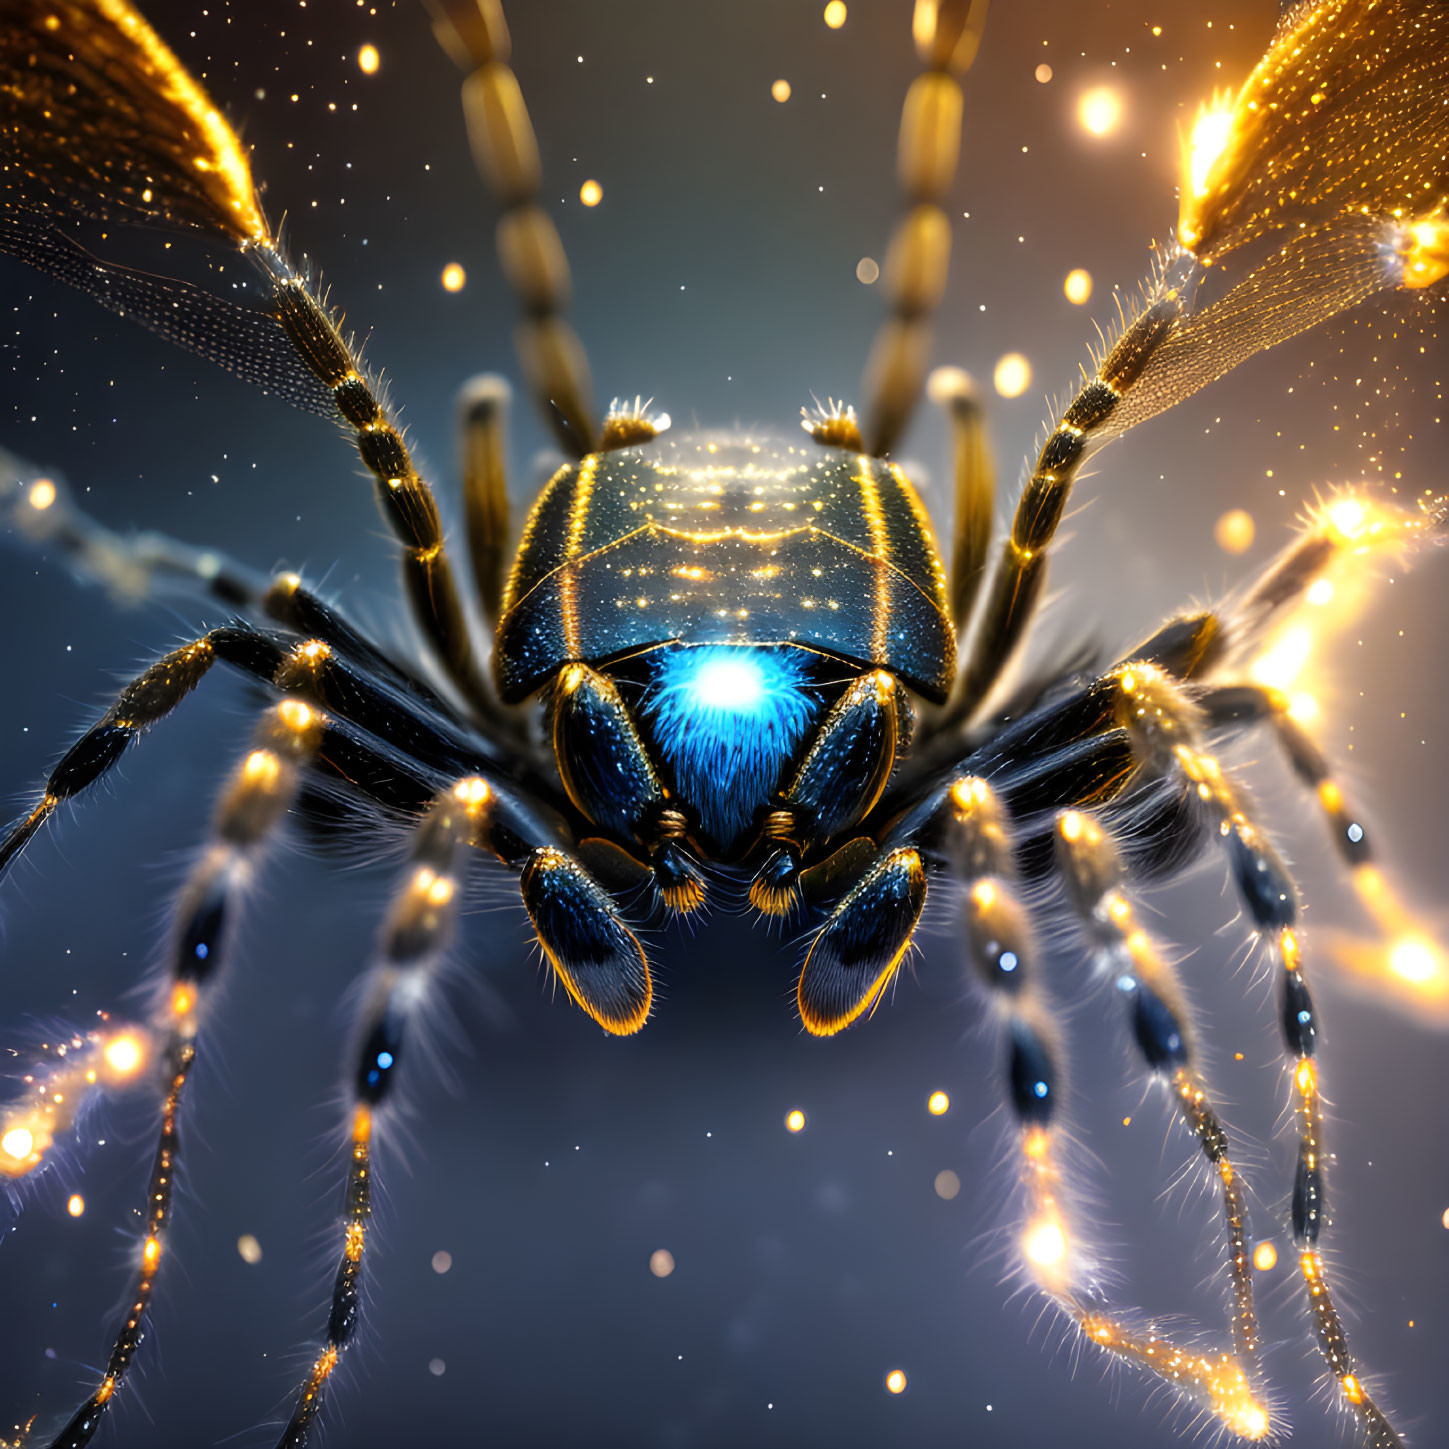 Golden spider digital art with blue glowing eye on starry night backdrop